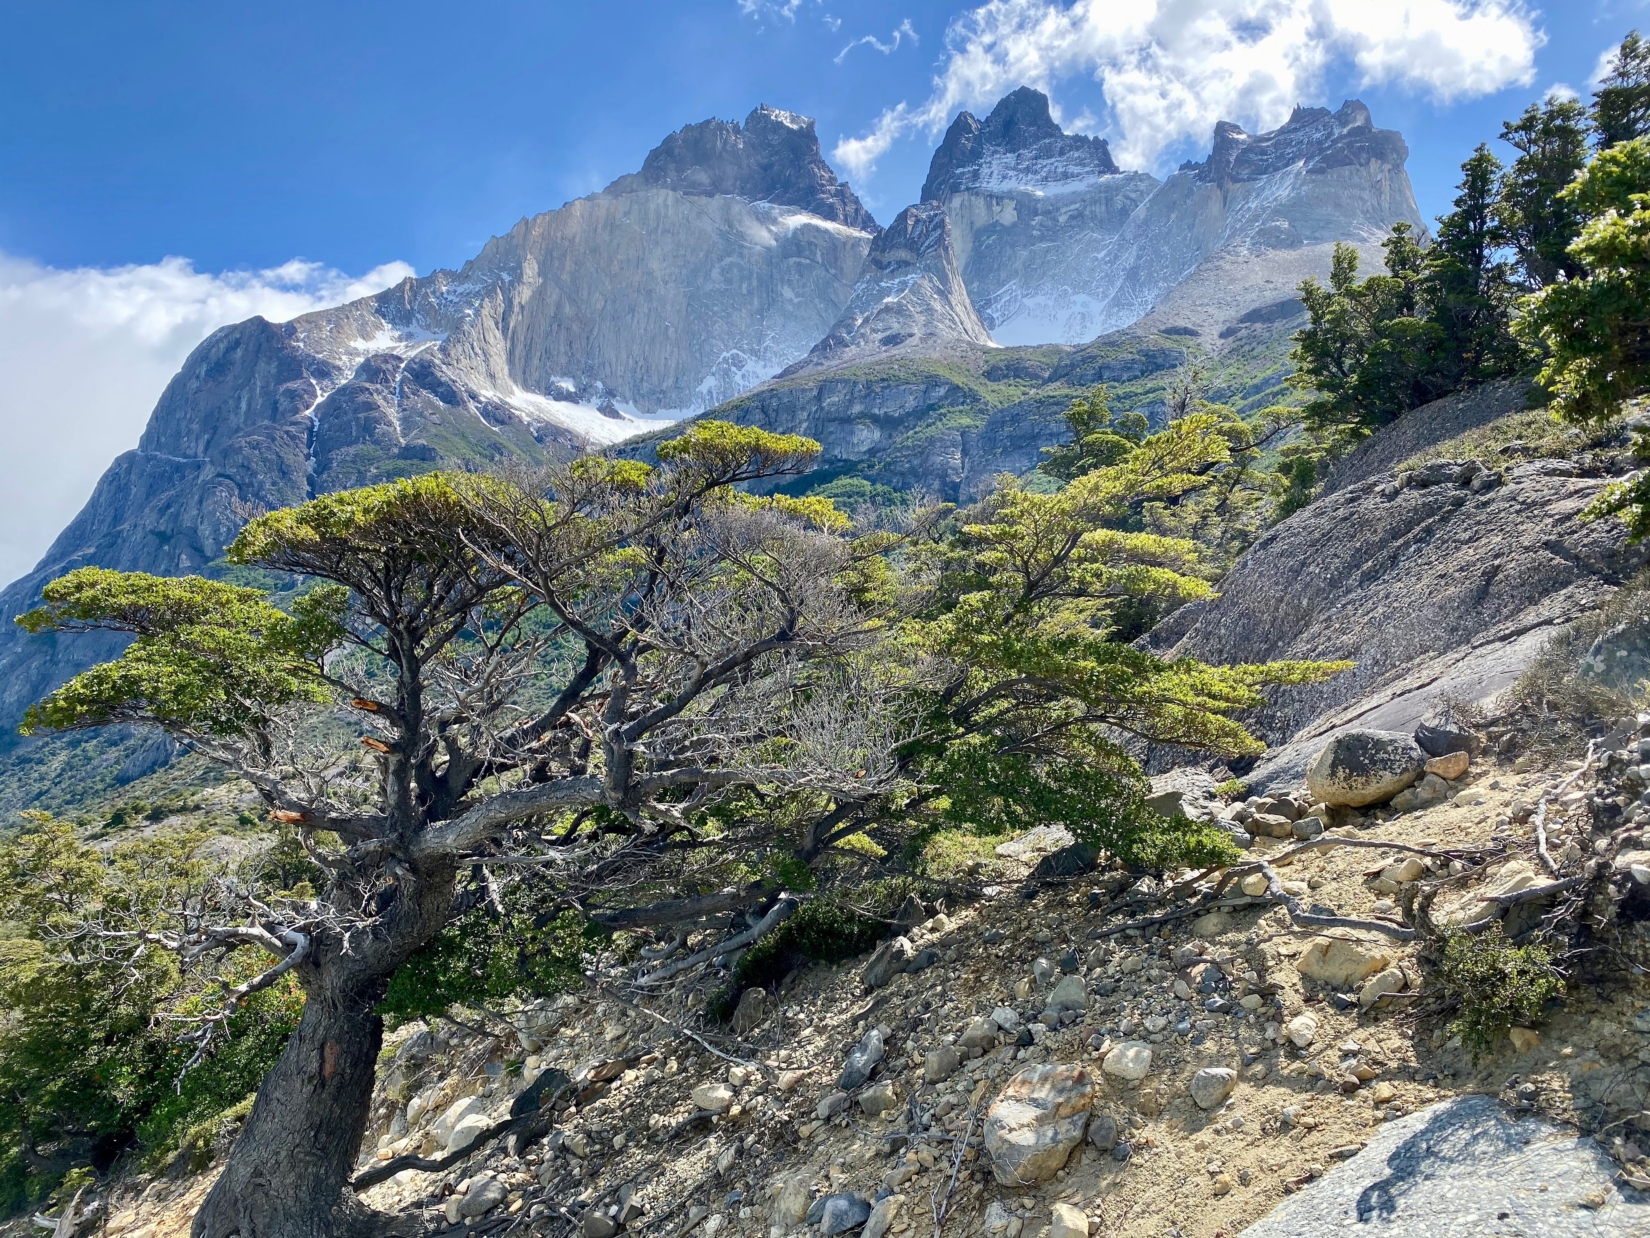 A photograph of a tree shaped by wind in Torres del Paine National Park, with mountains looming above